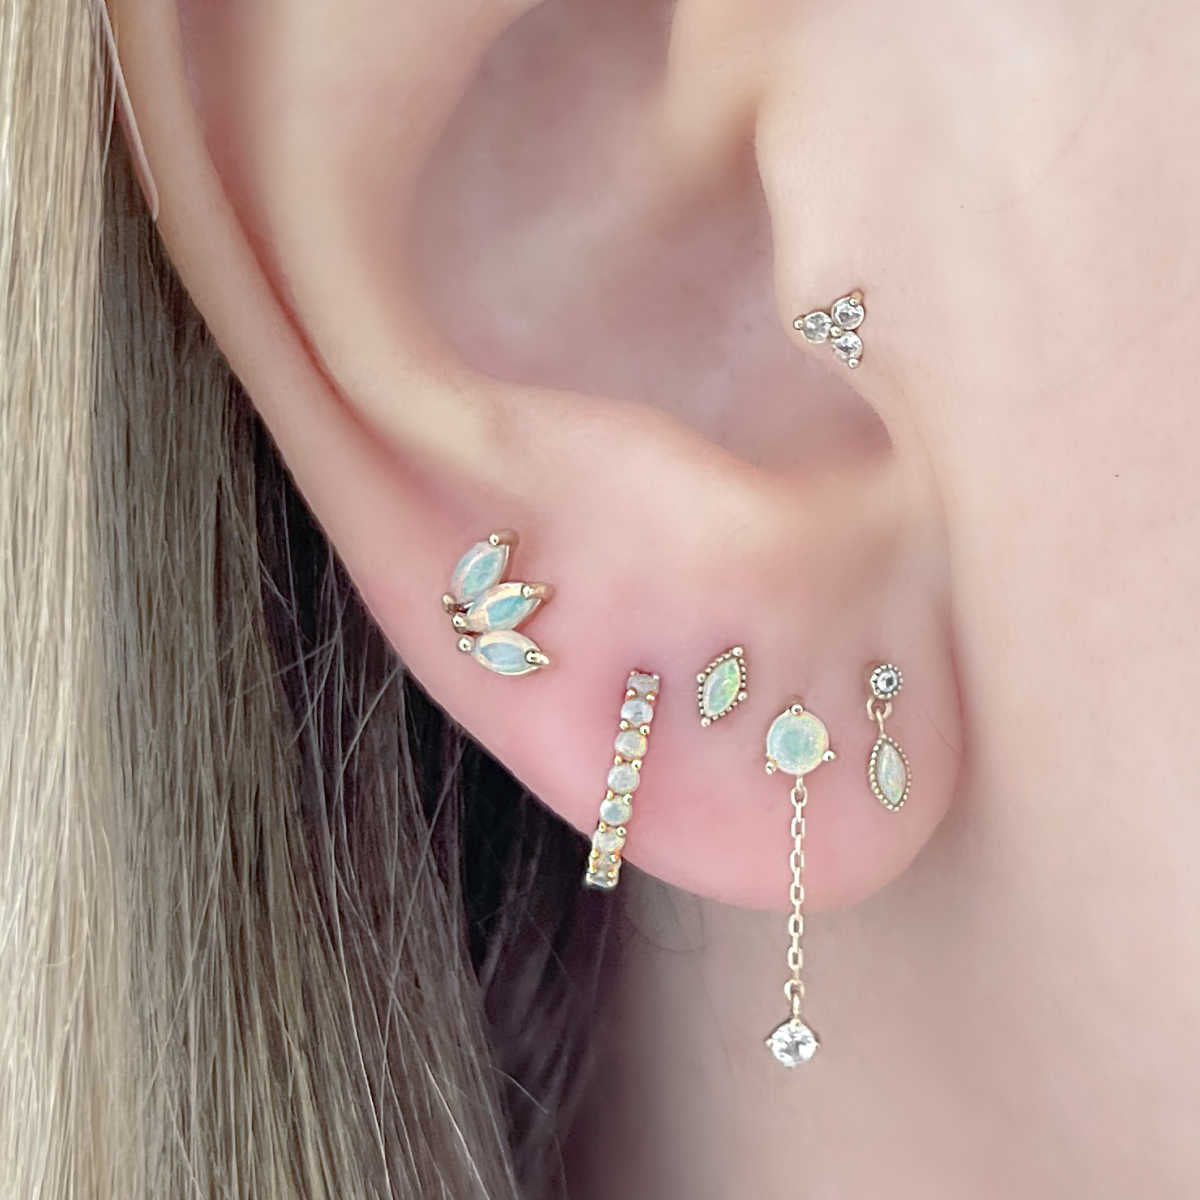 Opal Huggie Earrings | Gold Cartilage Piercing & Helix Hoops from Two of Most